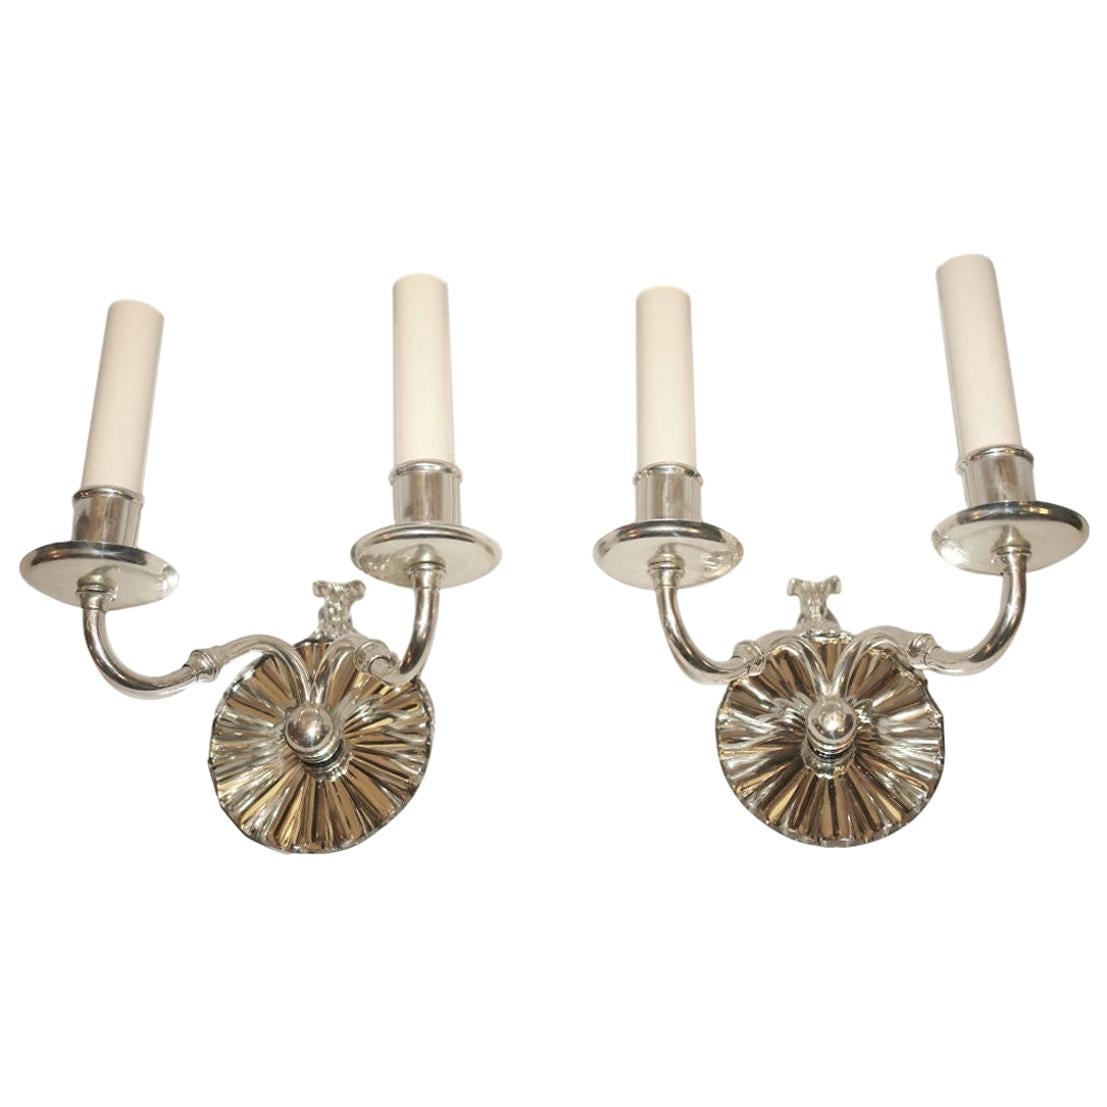 Set of Silver Plated Mirrored Sconces, Sold Per Pair